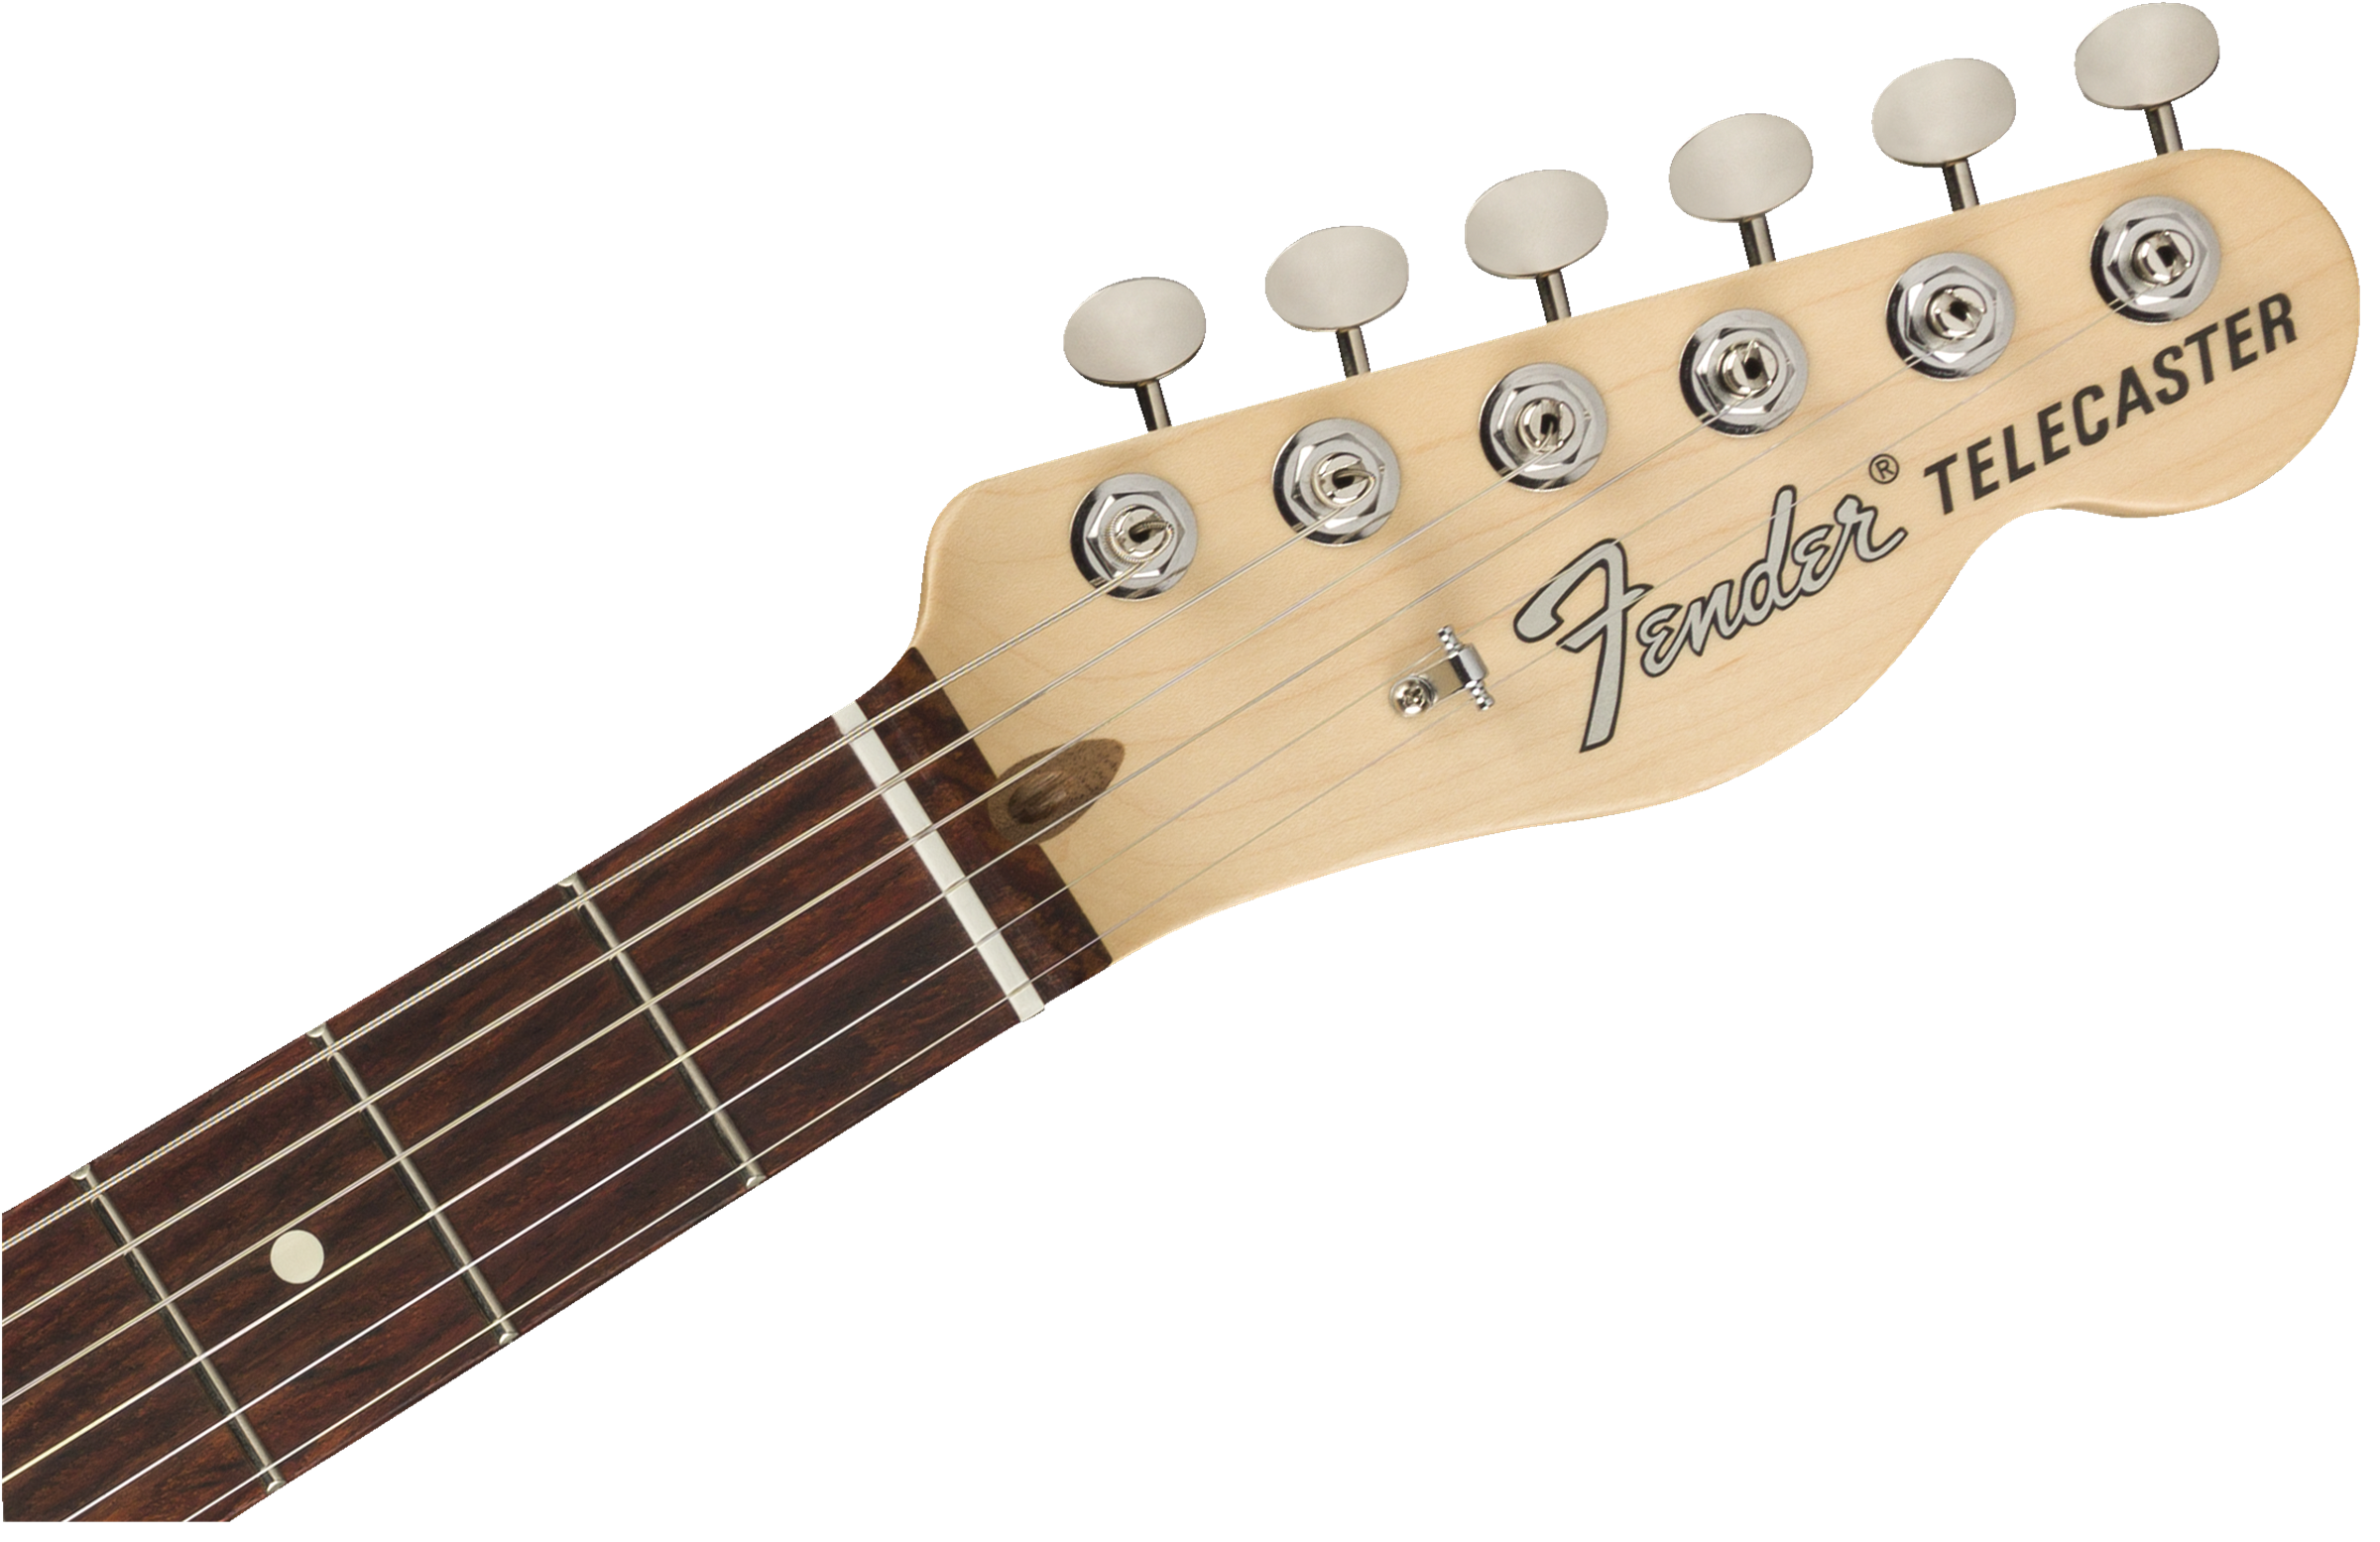 Fender American Performer Telecaster with Humbucking Rosewood Fingerboard - Satin Surf Green 0115120357